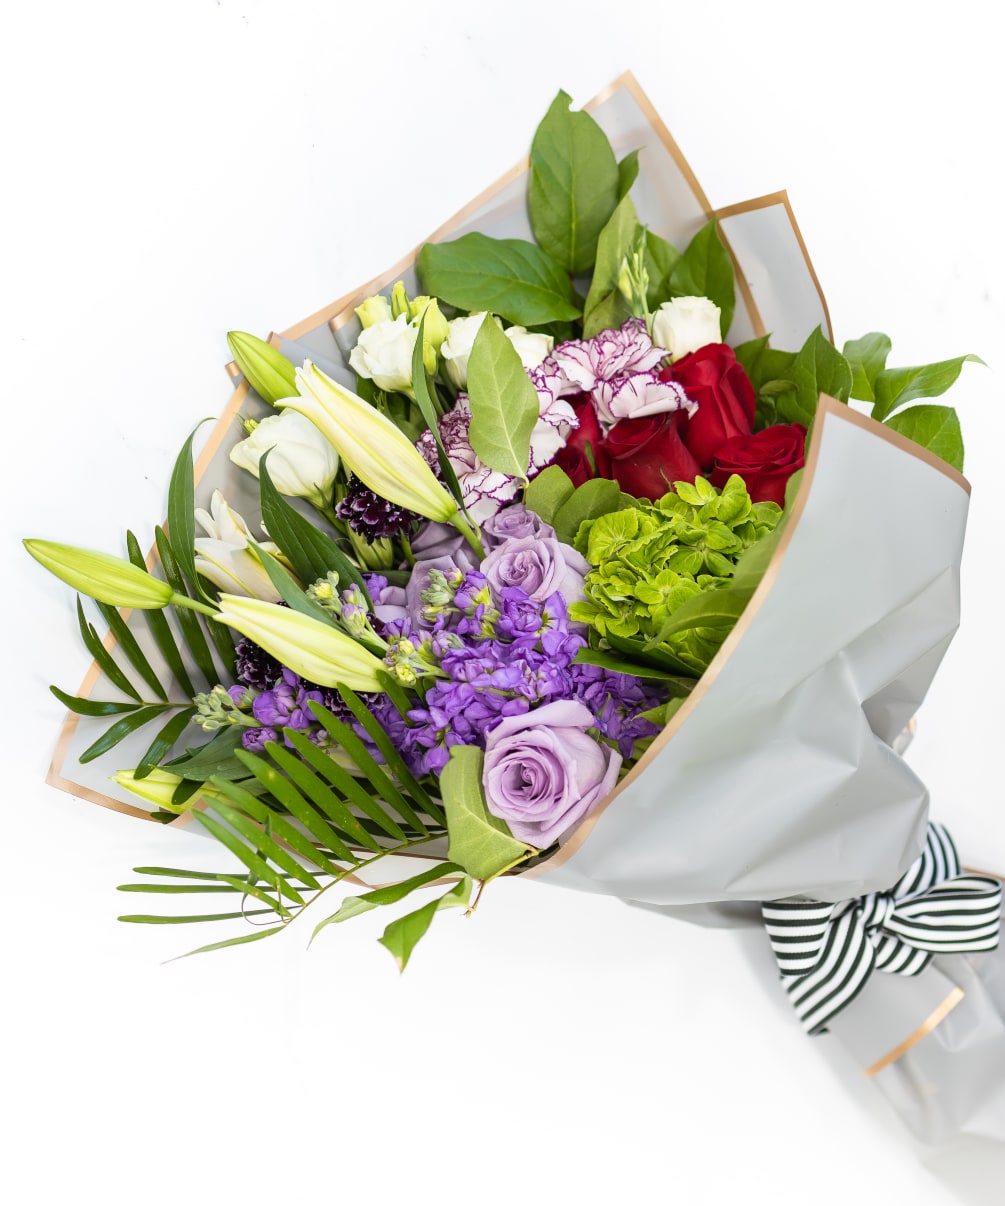 Hand-delivered romantic blooms wrapped in decorative Kraft paper to enjoy yourself or